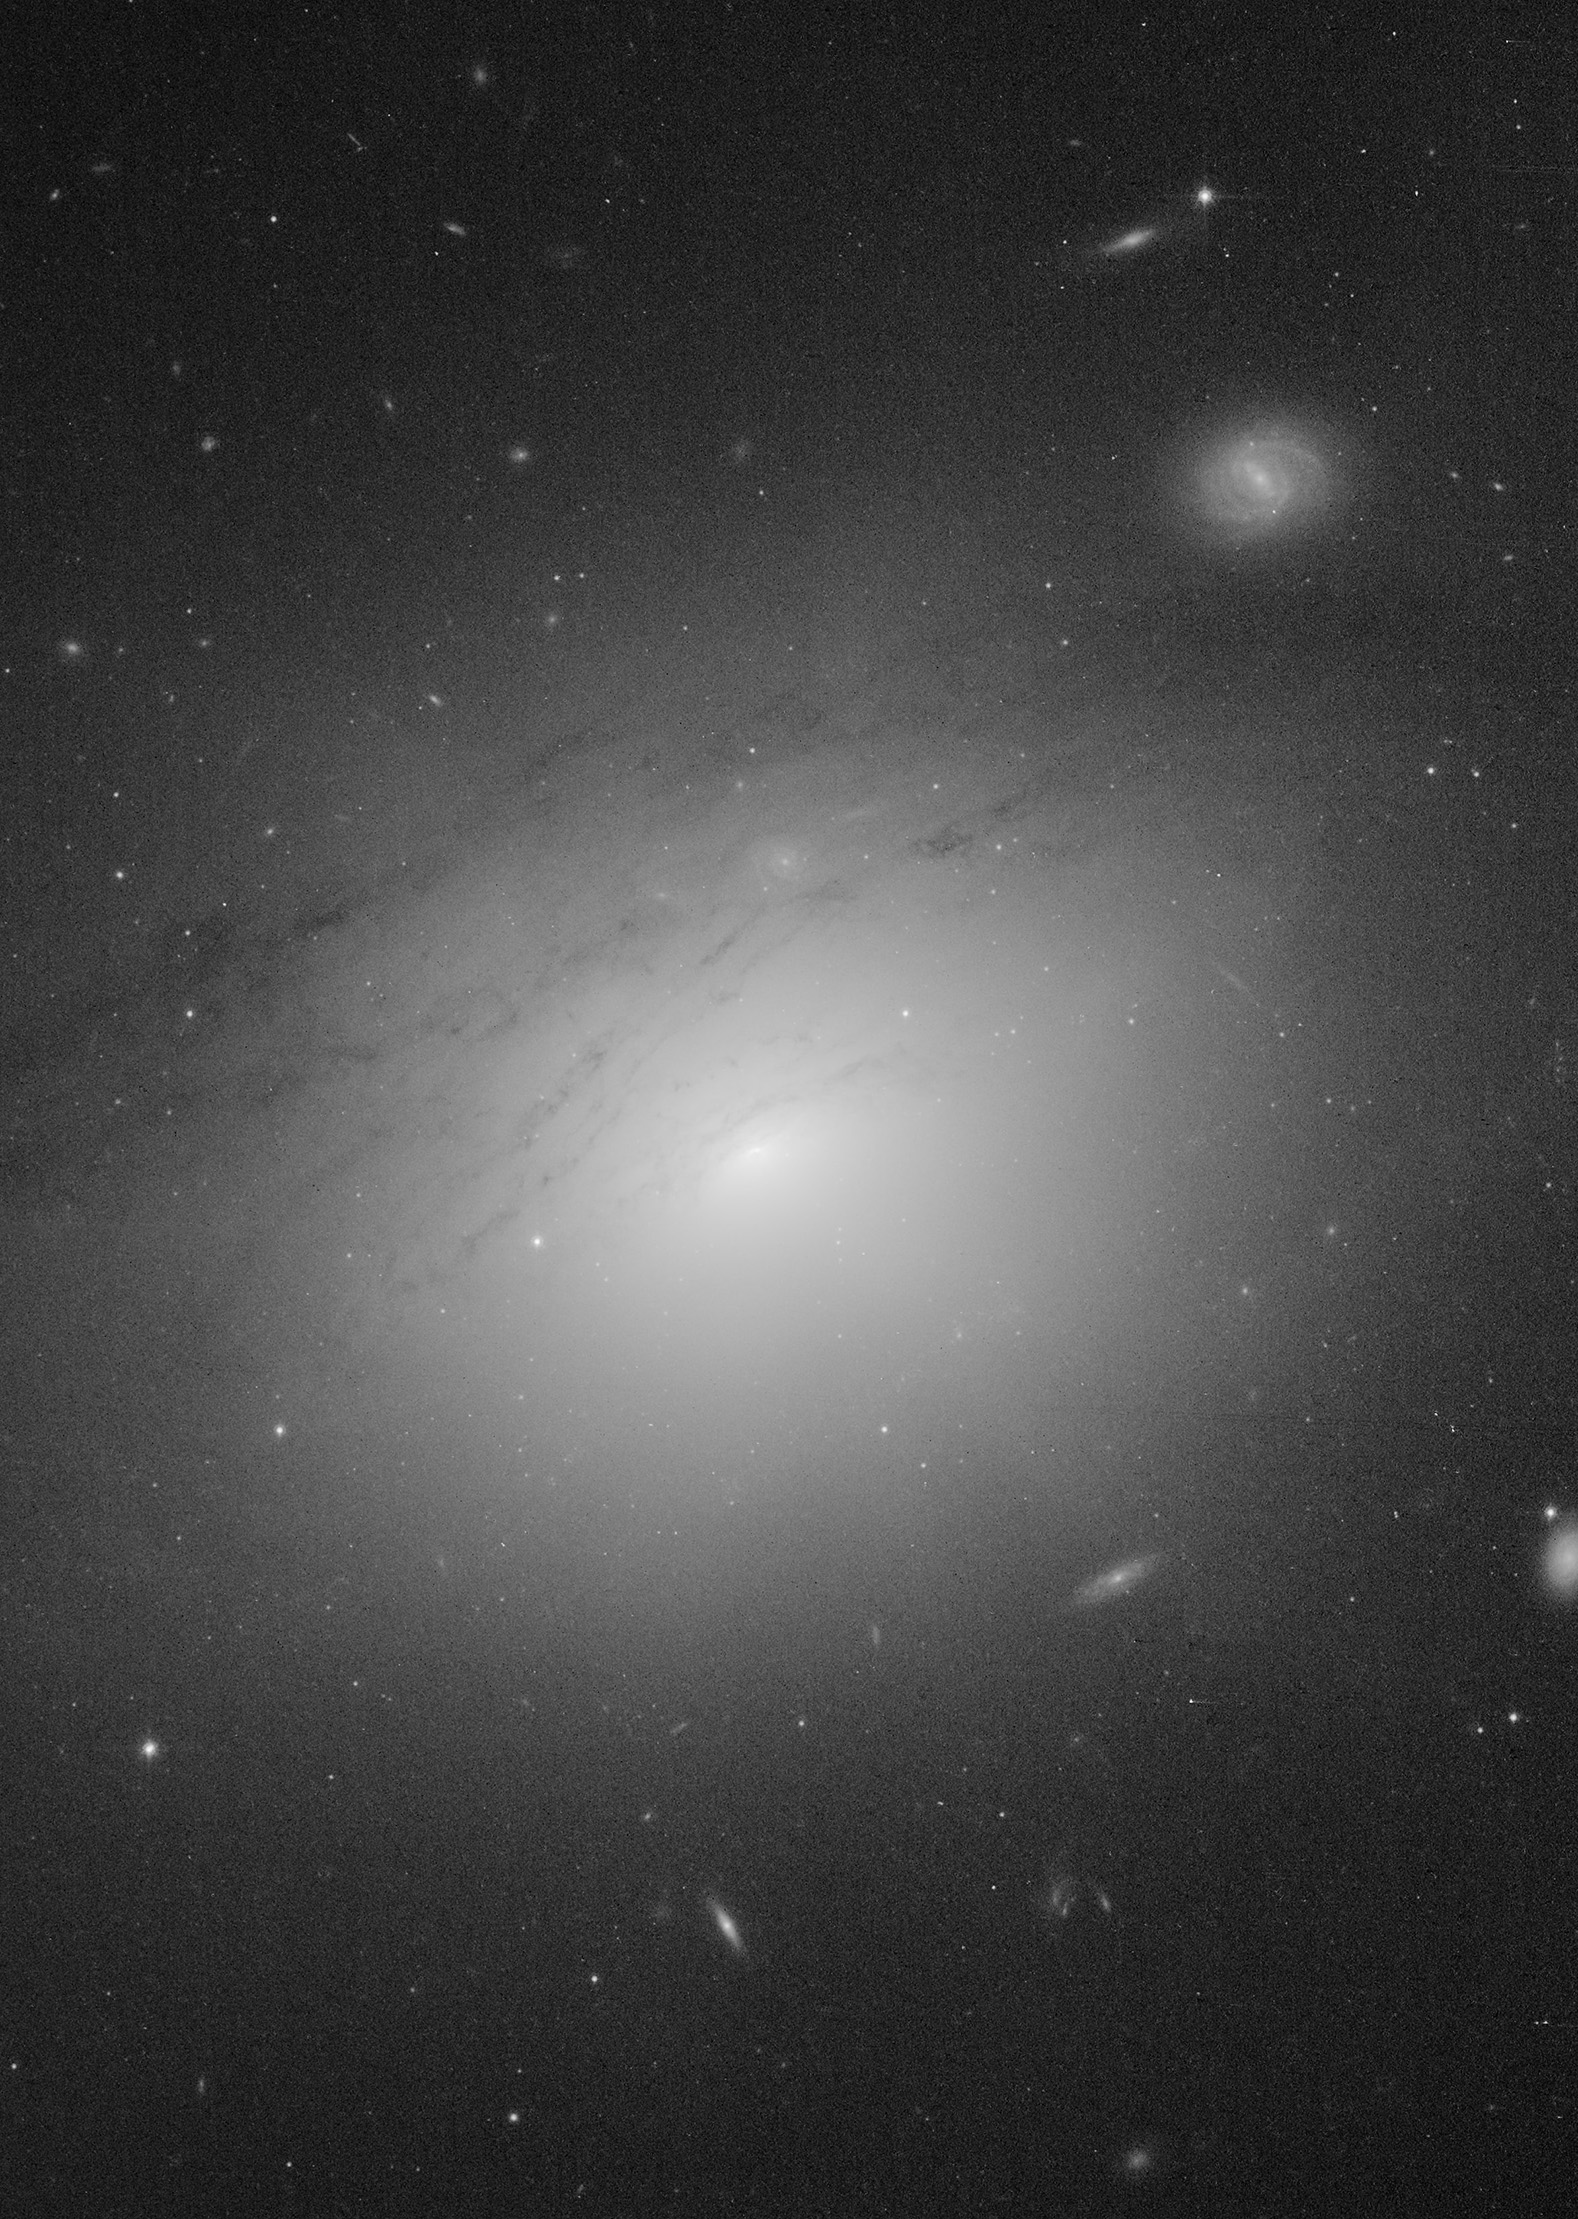 Judy Schmidt, an image processing expert and citizen scientist, processed this image of IC5063--a Seyfert galaxy with an active galactic nuclei--from Barth's Prop15444 and discovered what looked like dark shadows or cones pointing inward towards the center of the galaxy.